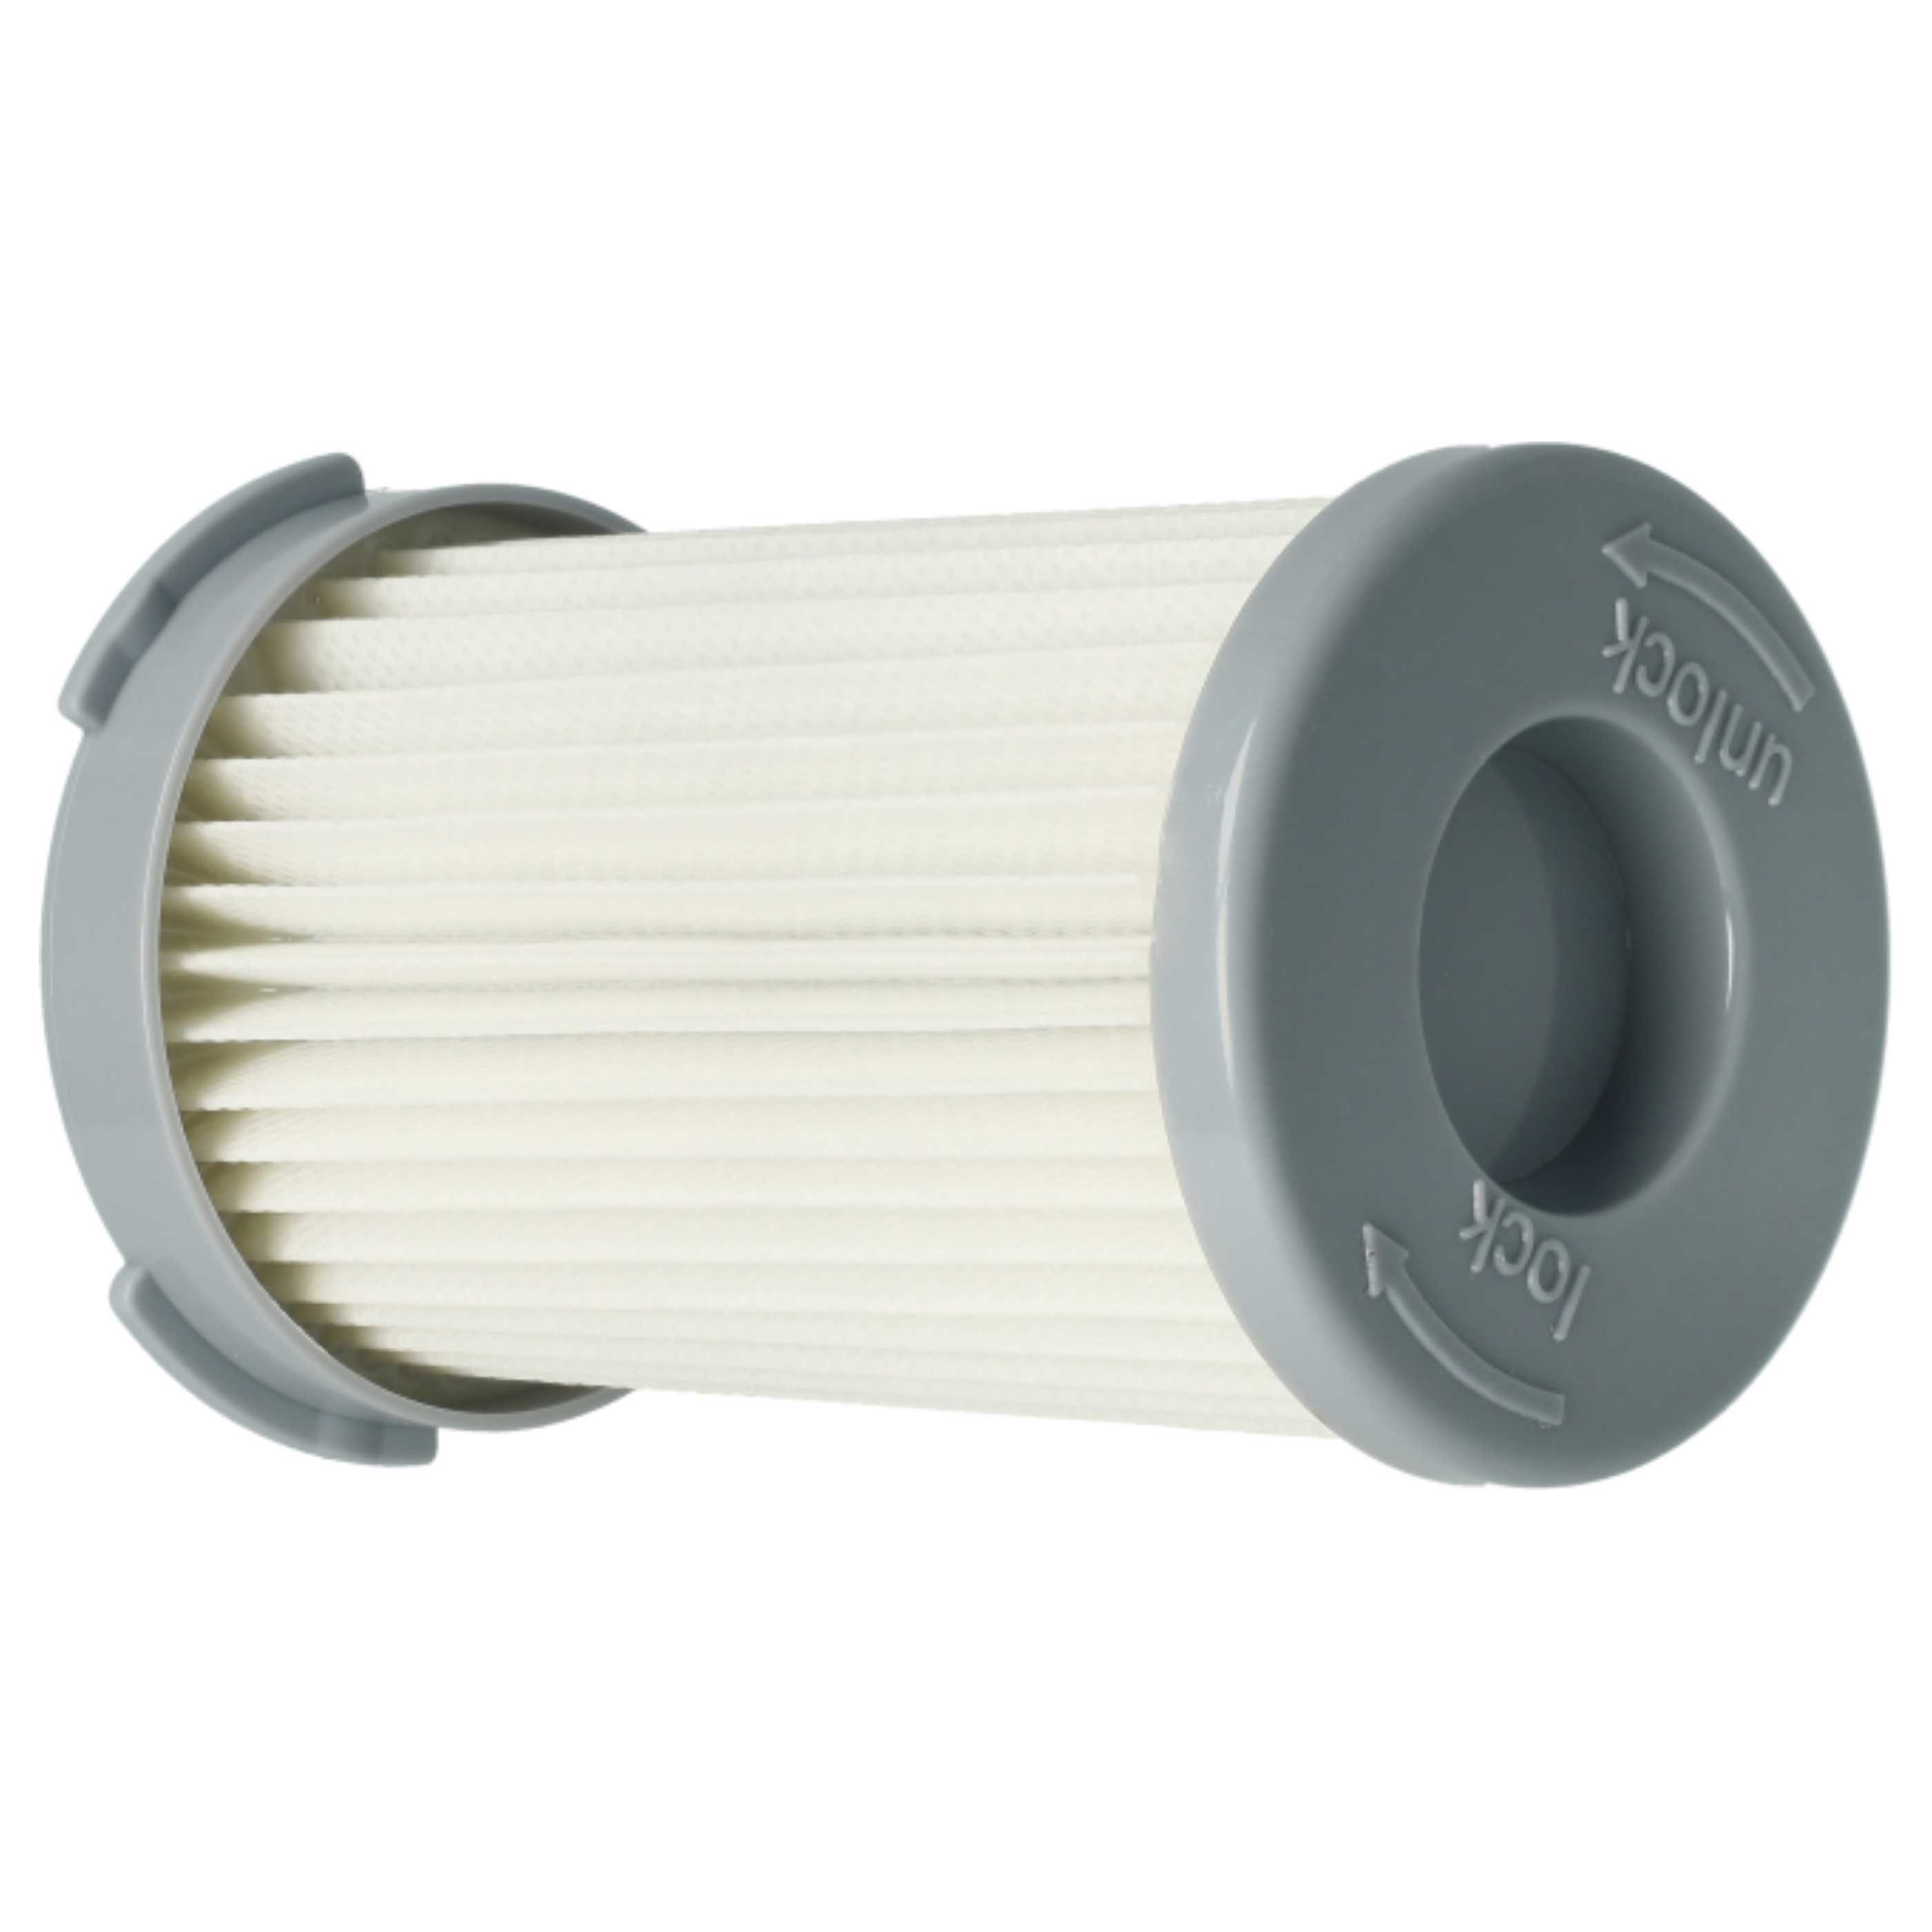 3x exhaust filter replaces Electrolux EF75B for AEG/ElectroluxVacuum Cleaner